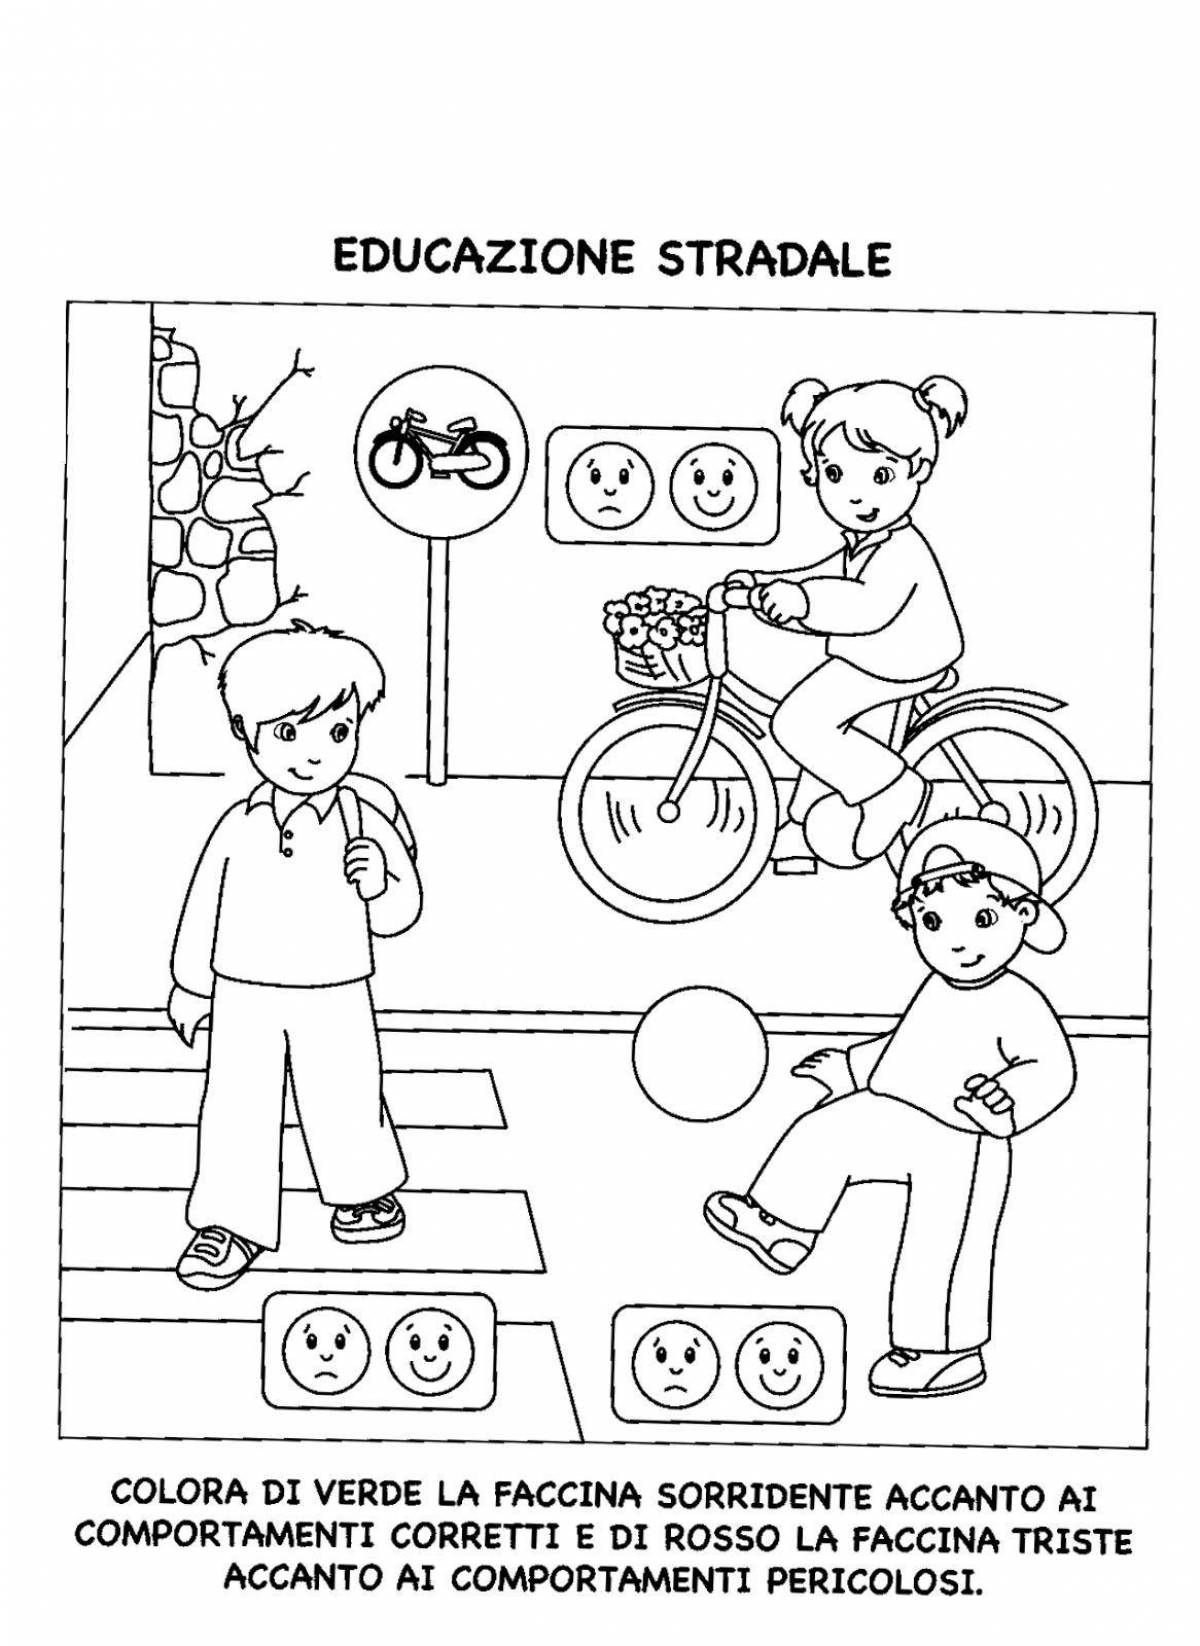 Stimulating rules of the road coloring pages for preschoolers